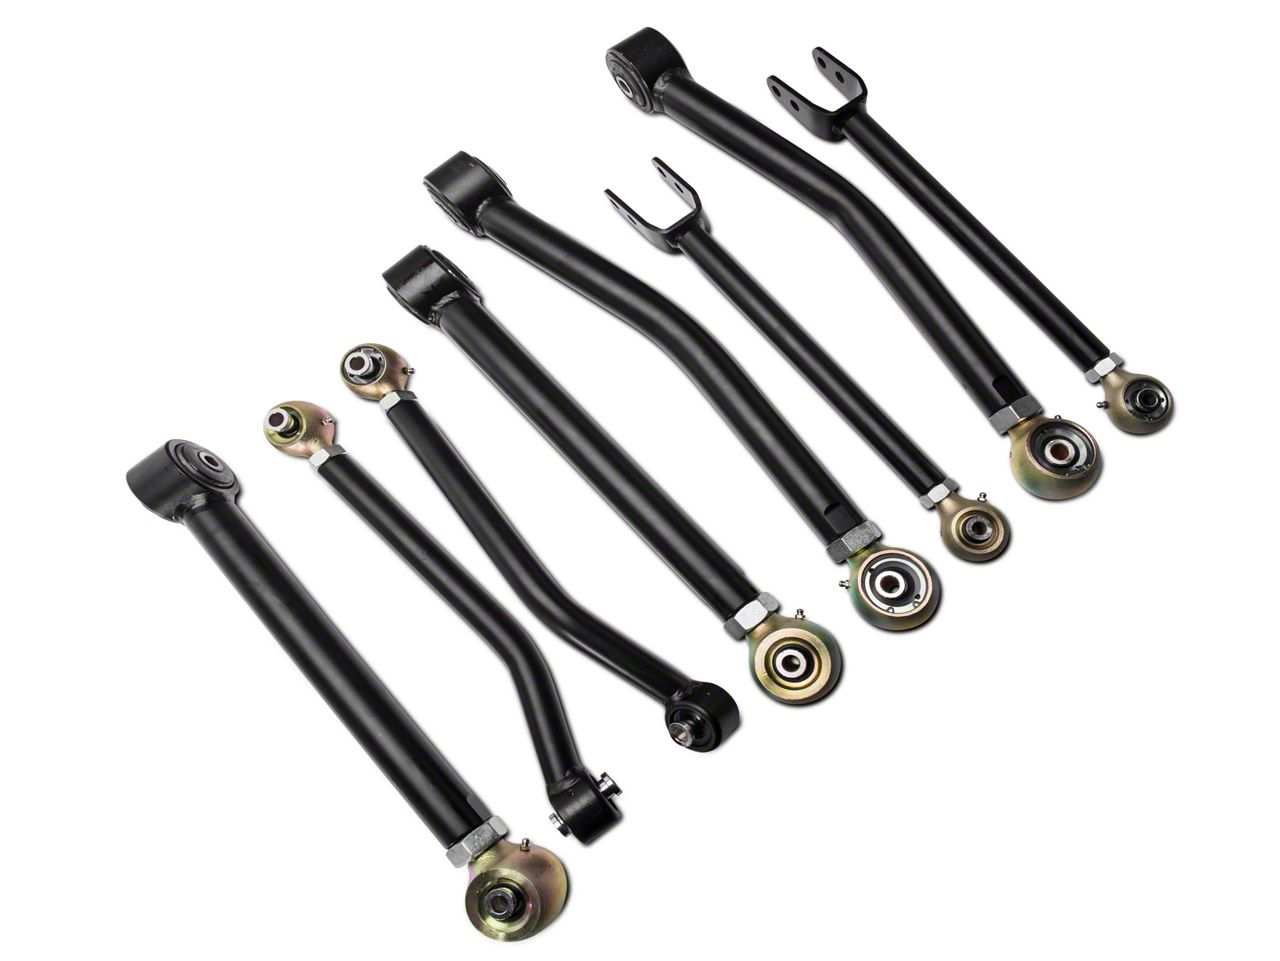 Lower Adjustable Control Arms for J-eep Wrangler JK JKU 2007-2018，dynofit 0-4.5inch Front Suspension Arms Fit Wrangler JK JKU Rubicon Sahara Unlimited Moab and More Heavy Duty SUV/OFF-ROAD（Black） 